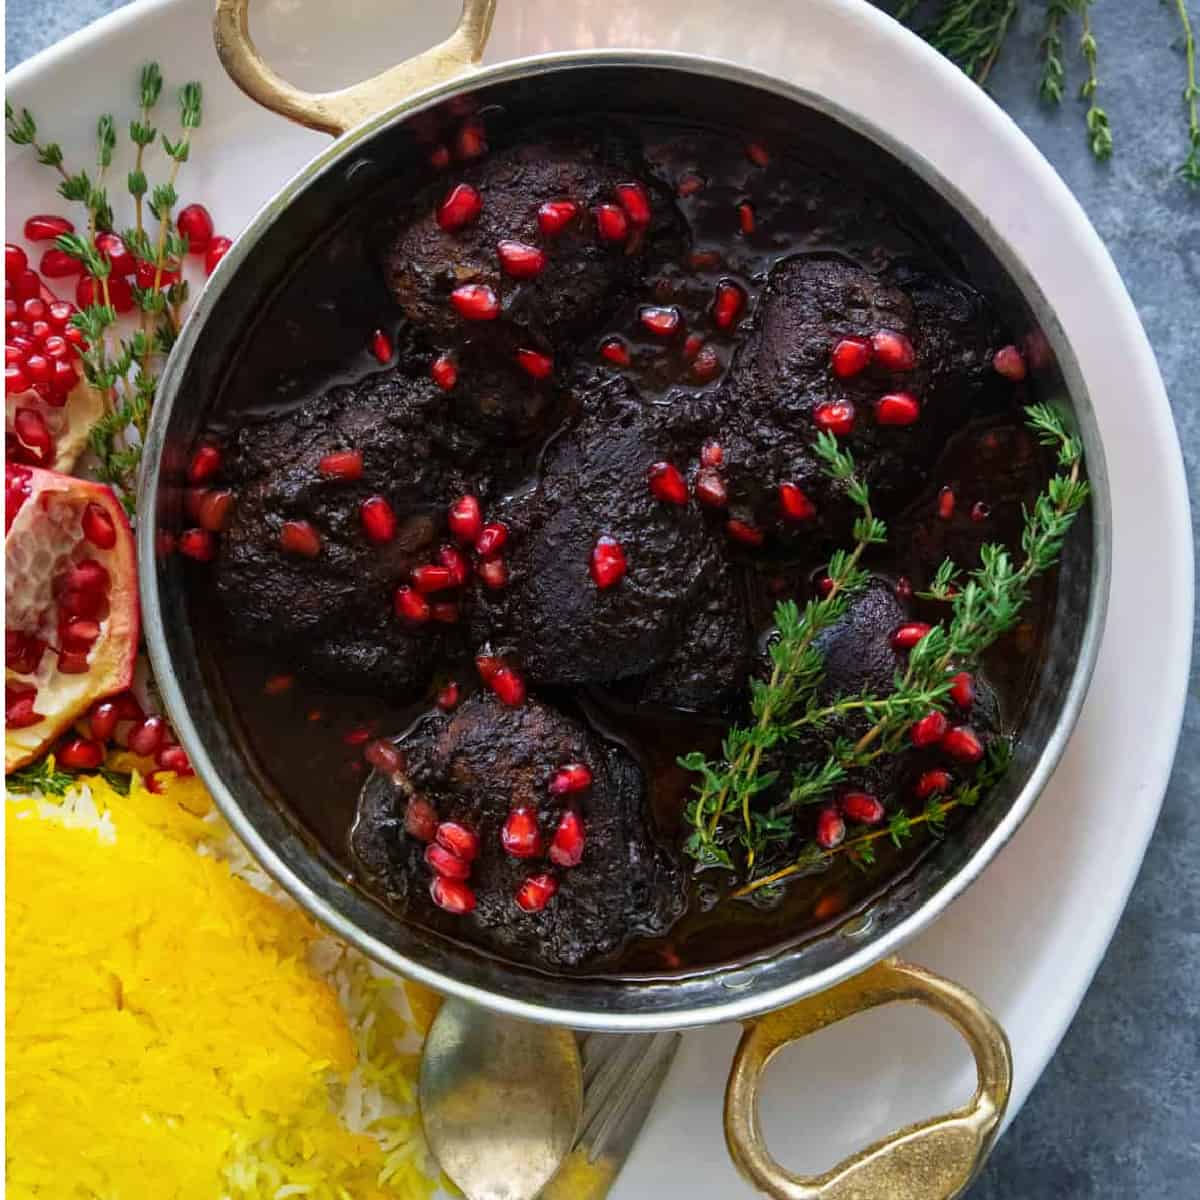 This pomegranate chicken is tangy and savory with a lot of flavor. Juicy chicken cooked in pomegranate juice makes this Persian classic a family favorite!
